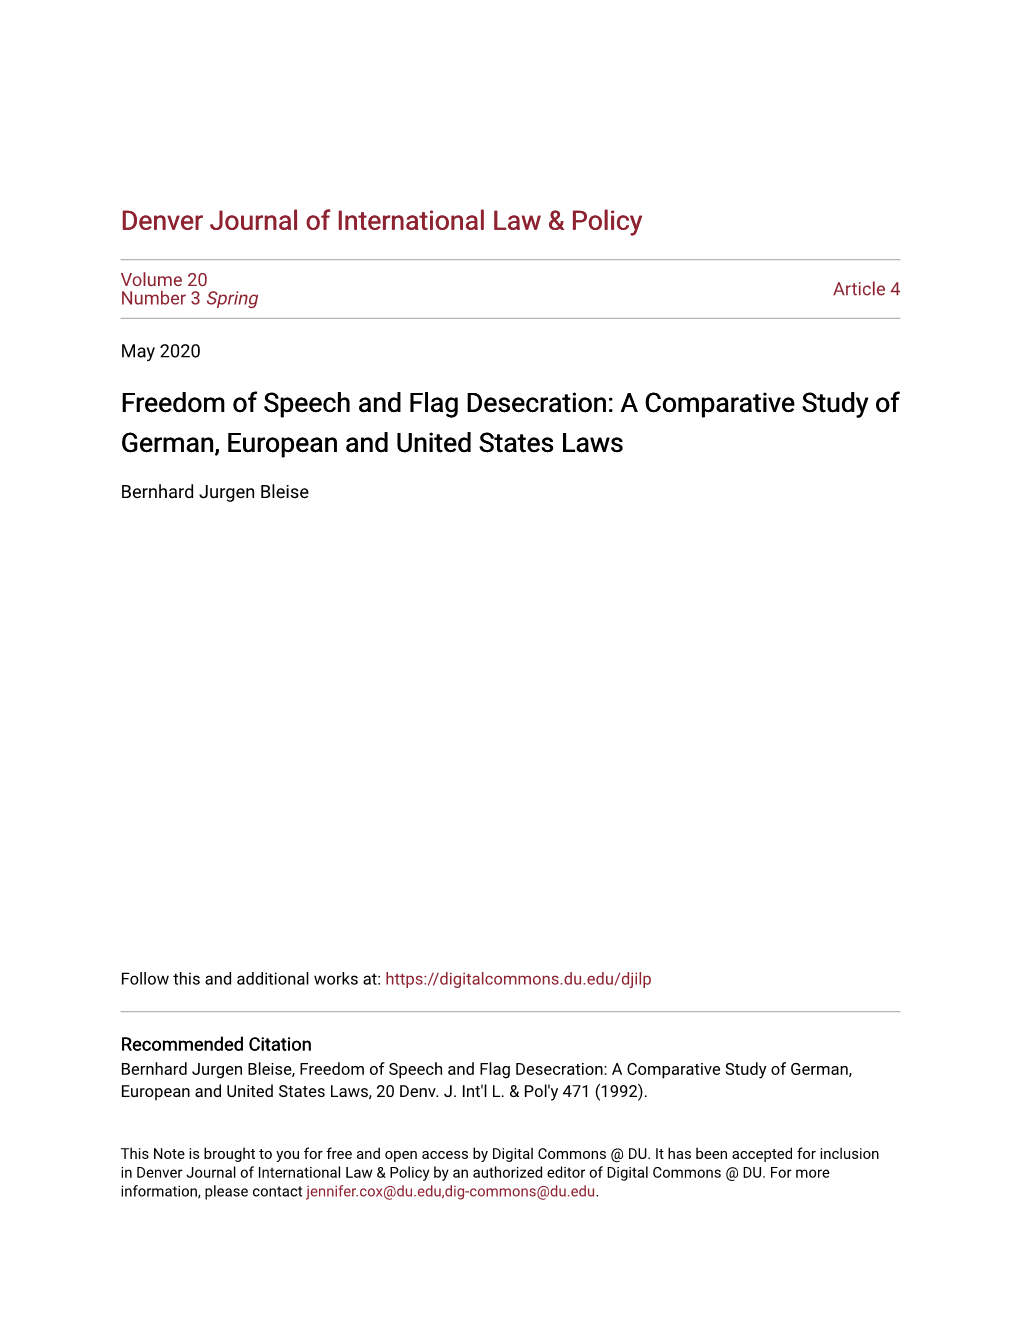 Freedom of Speech and Flag Desecration: a Comparative Study of German, European and United States Laws